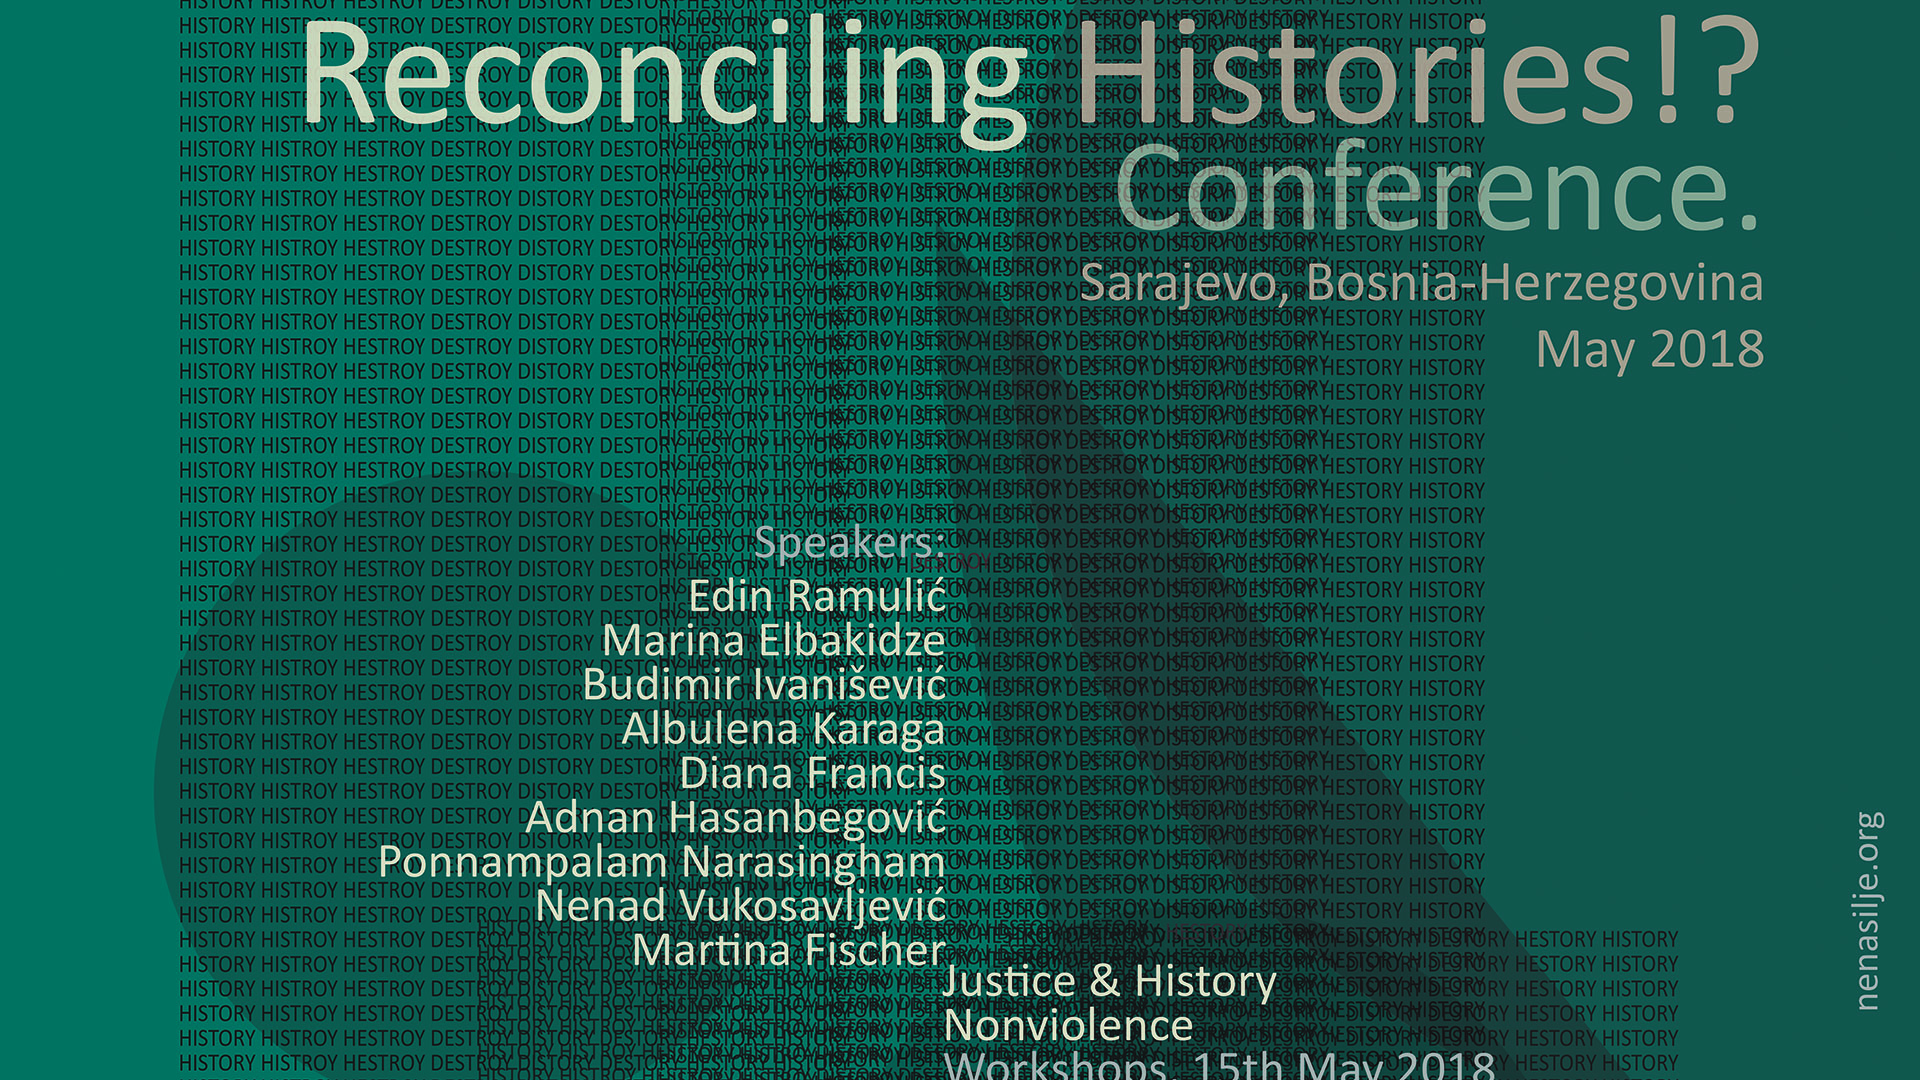 Video report: “Reconciling histories!?” Conference, Sarajevo 15-17th May, 2018